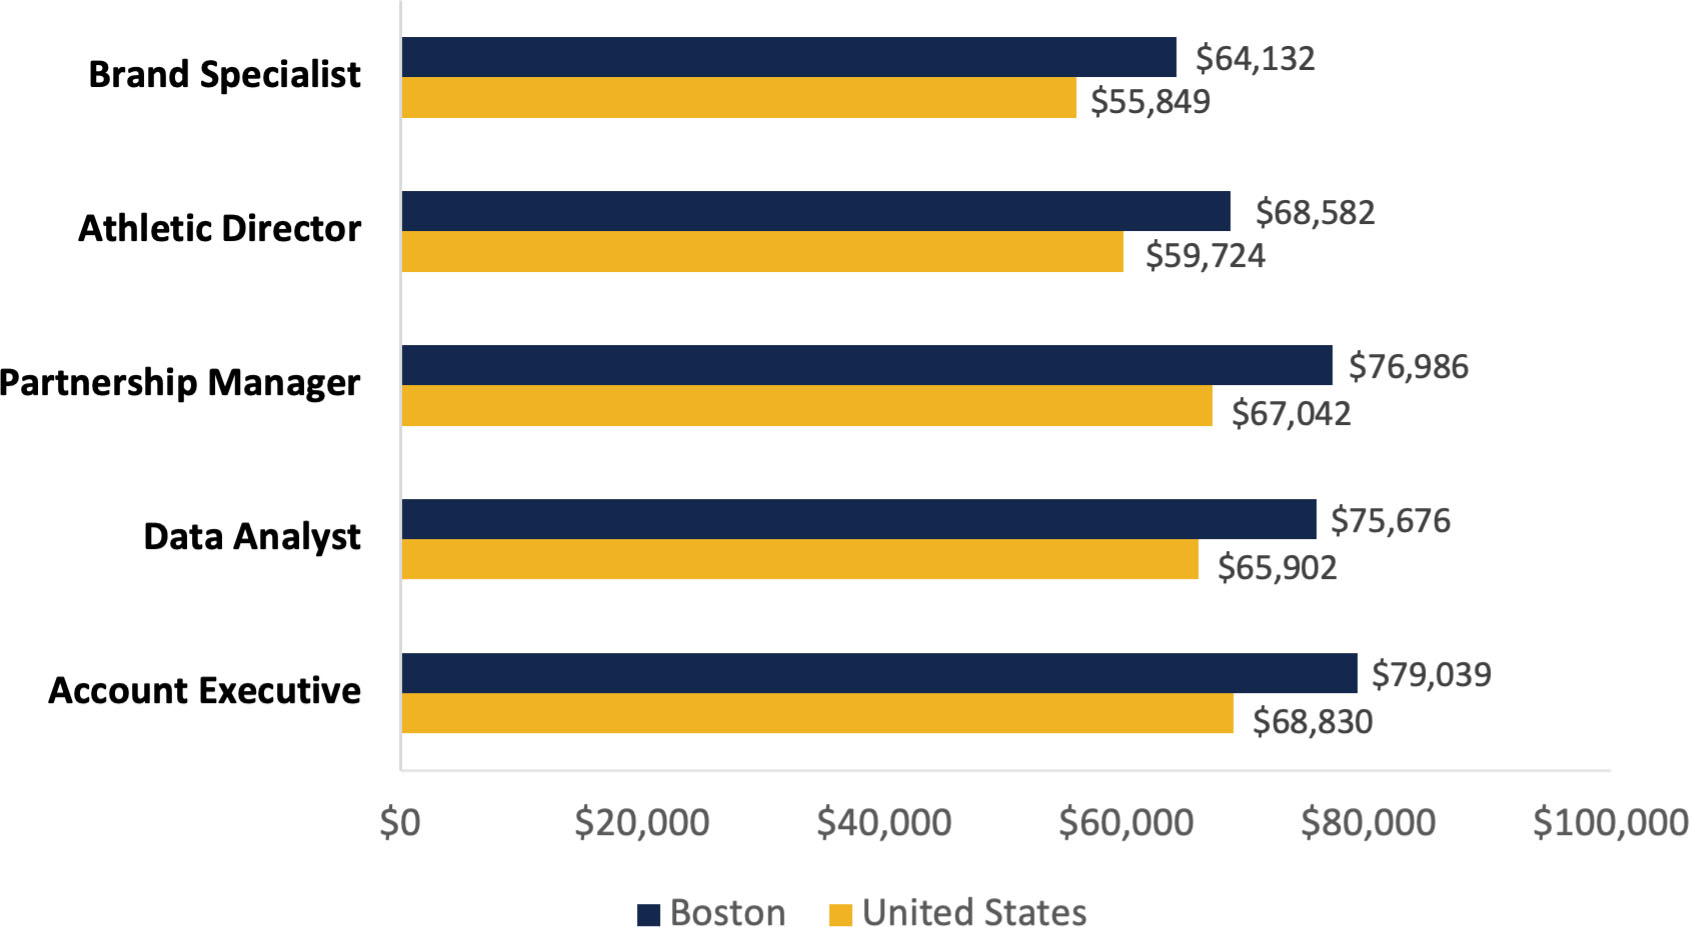 Chart showing salaries for various careers in Sports Management: Brand Specialist, $64,132 in Boston Area, $55,489 in United States; Athletic Director, $68,582 in Boston Area, $59,724 in United States; Partnership manager, $76,986 in Boston Area, $67,042 in United States; Data Analyst, $75,676 in Boston Area, $65,902 in United States; Account Executive, $79,039 in Boston Area, $68,830 in United States